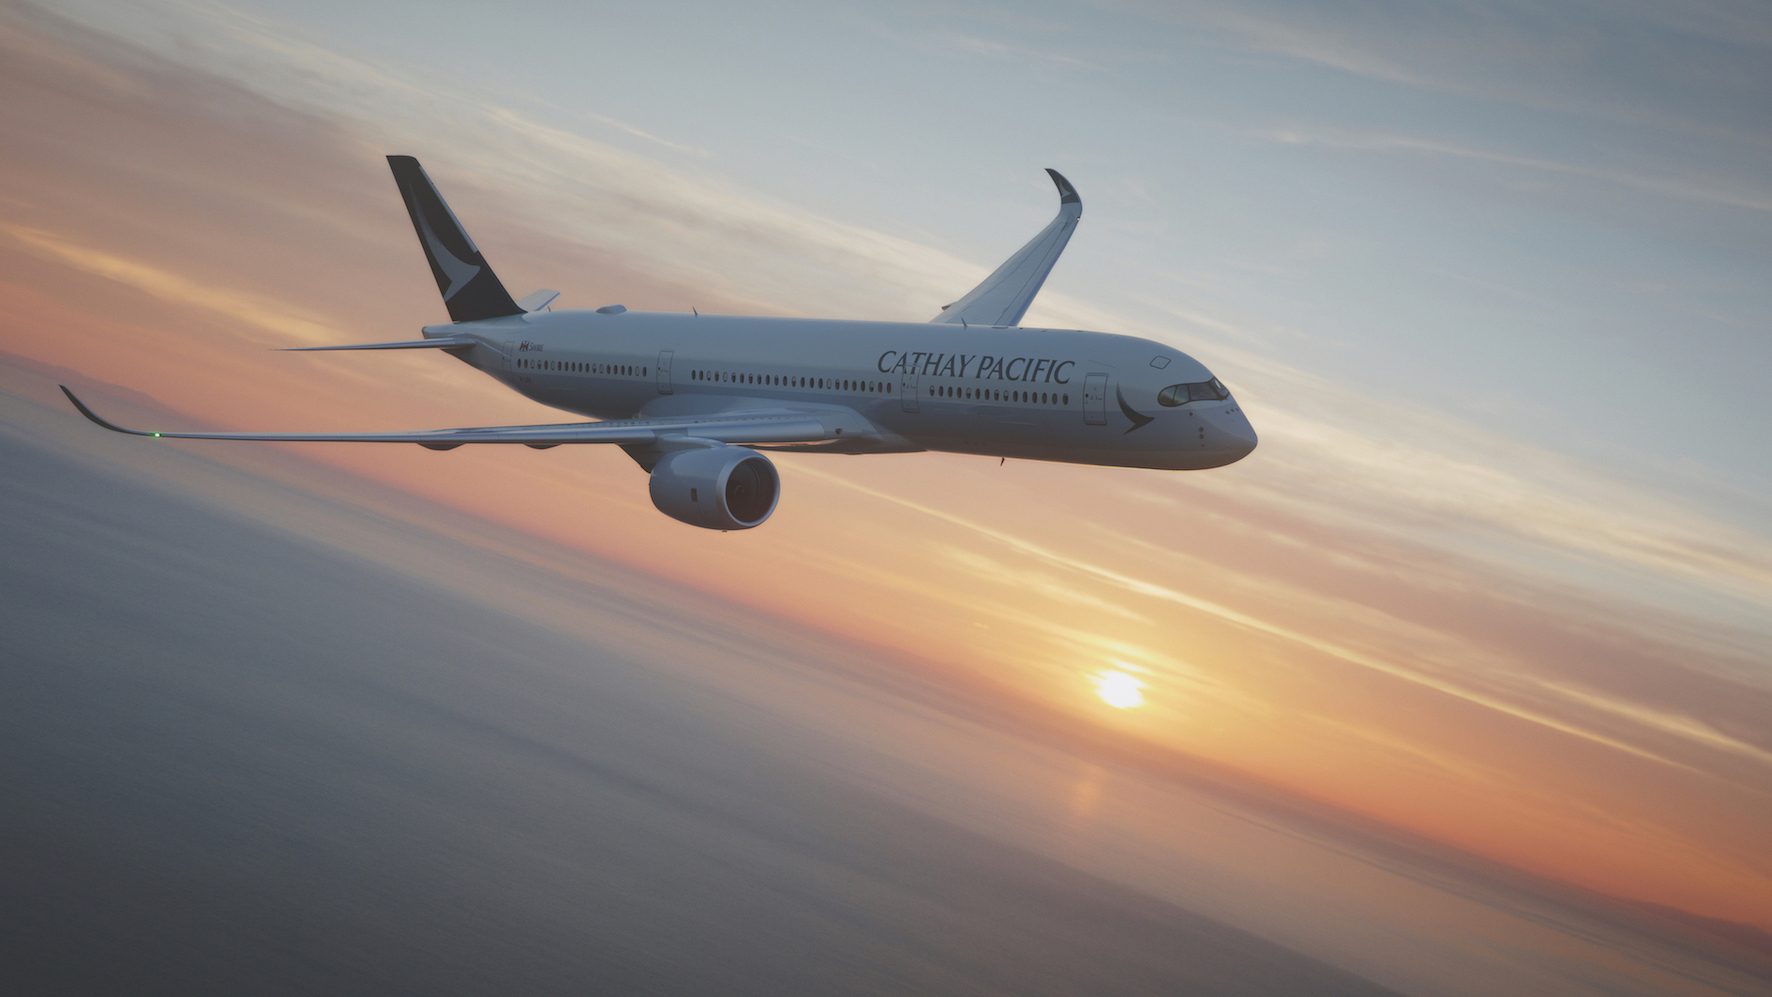 Cathay Pacific reports H1 2020 loss of US$1.27 billion